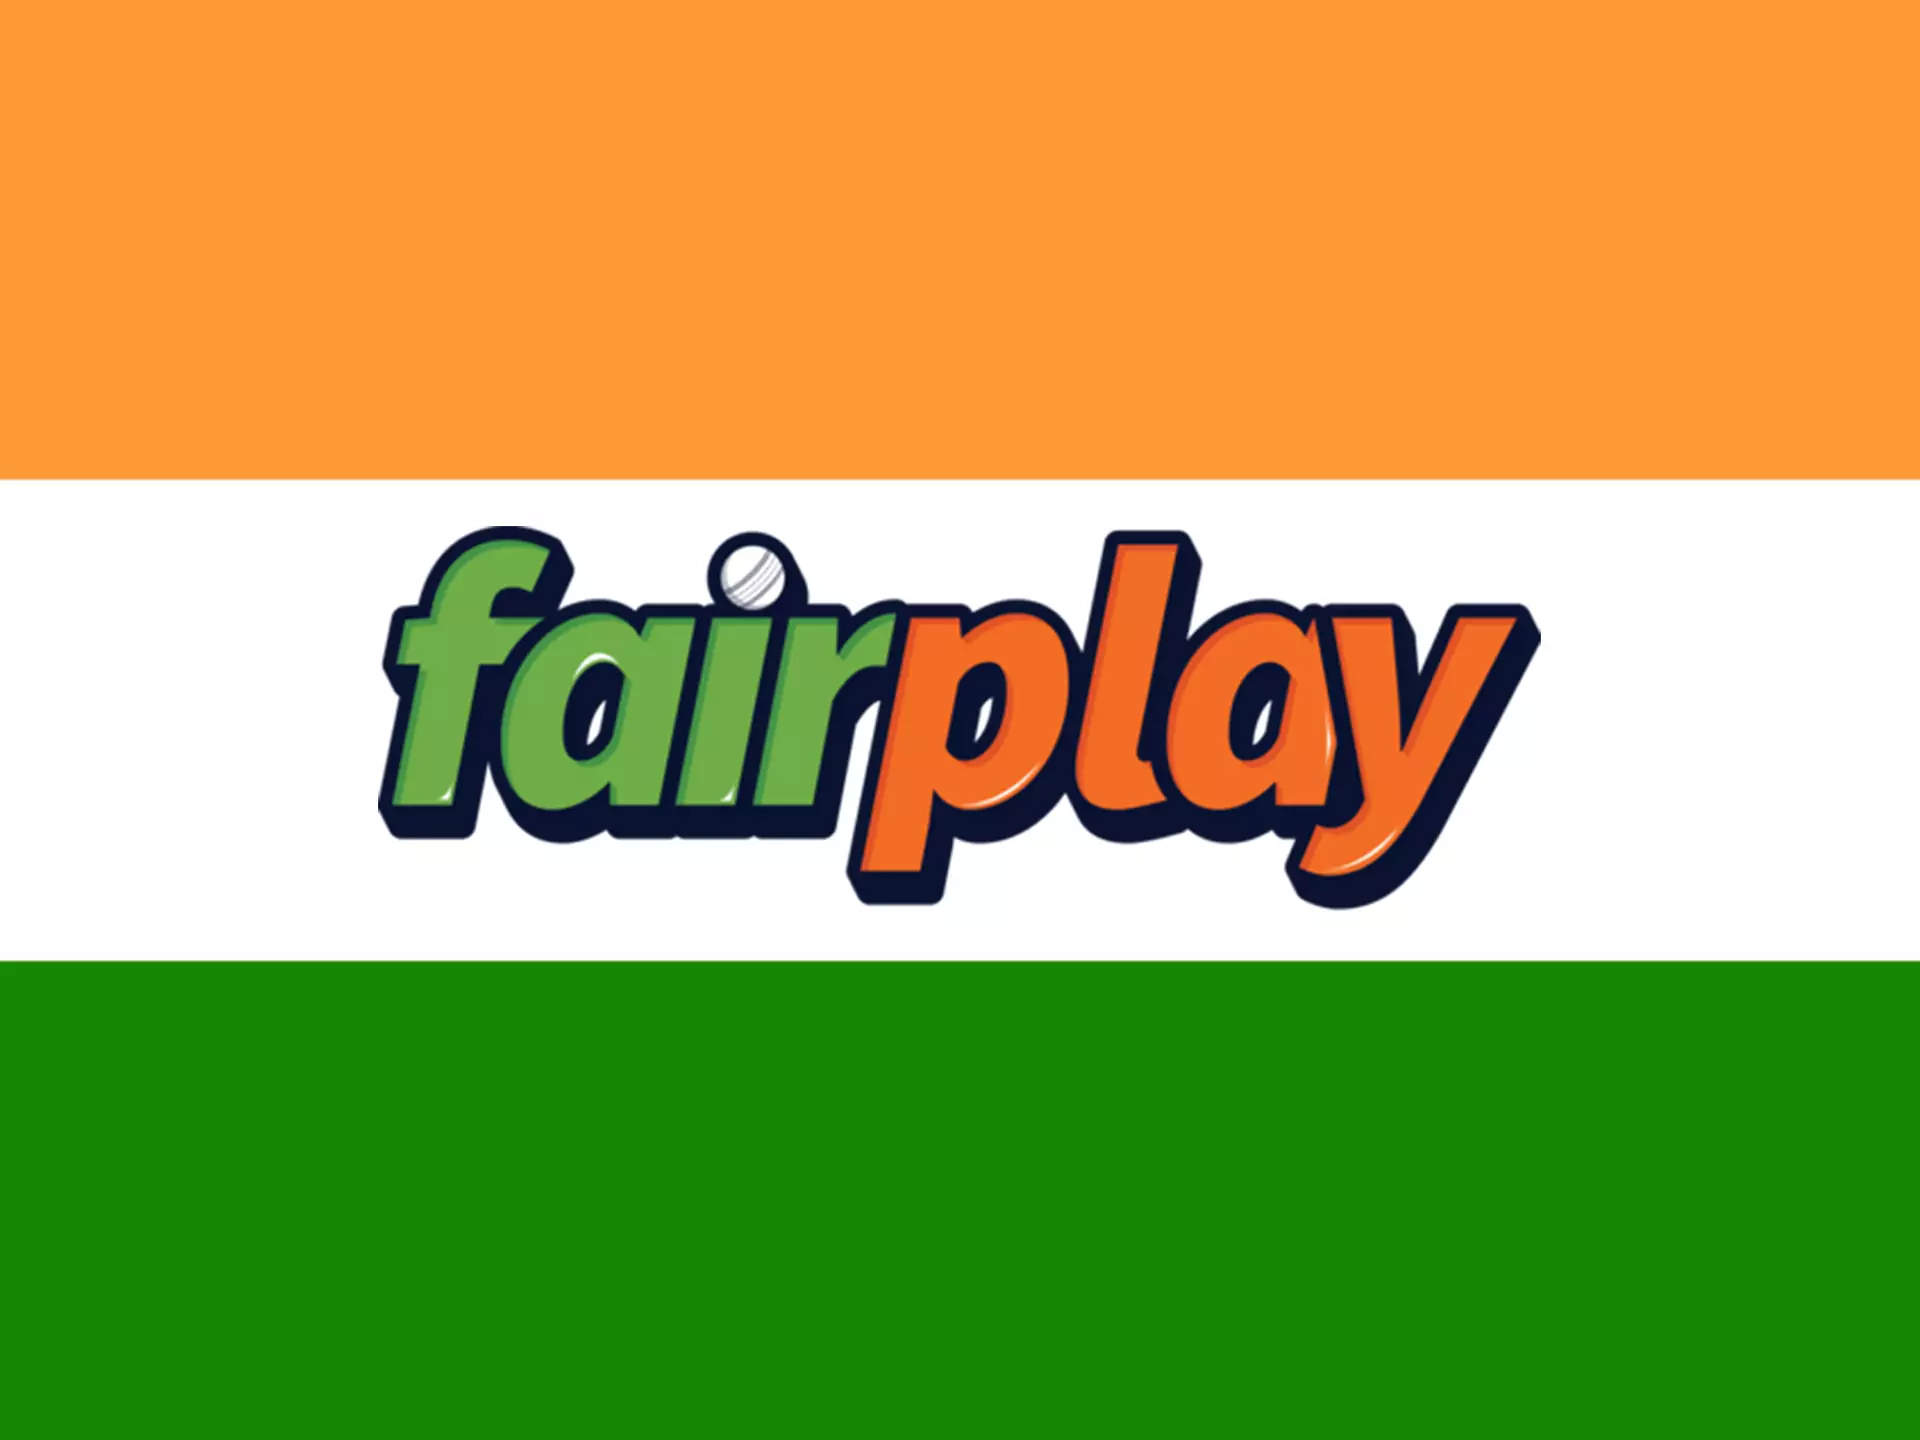 Fairplay is completely legal in India.